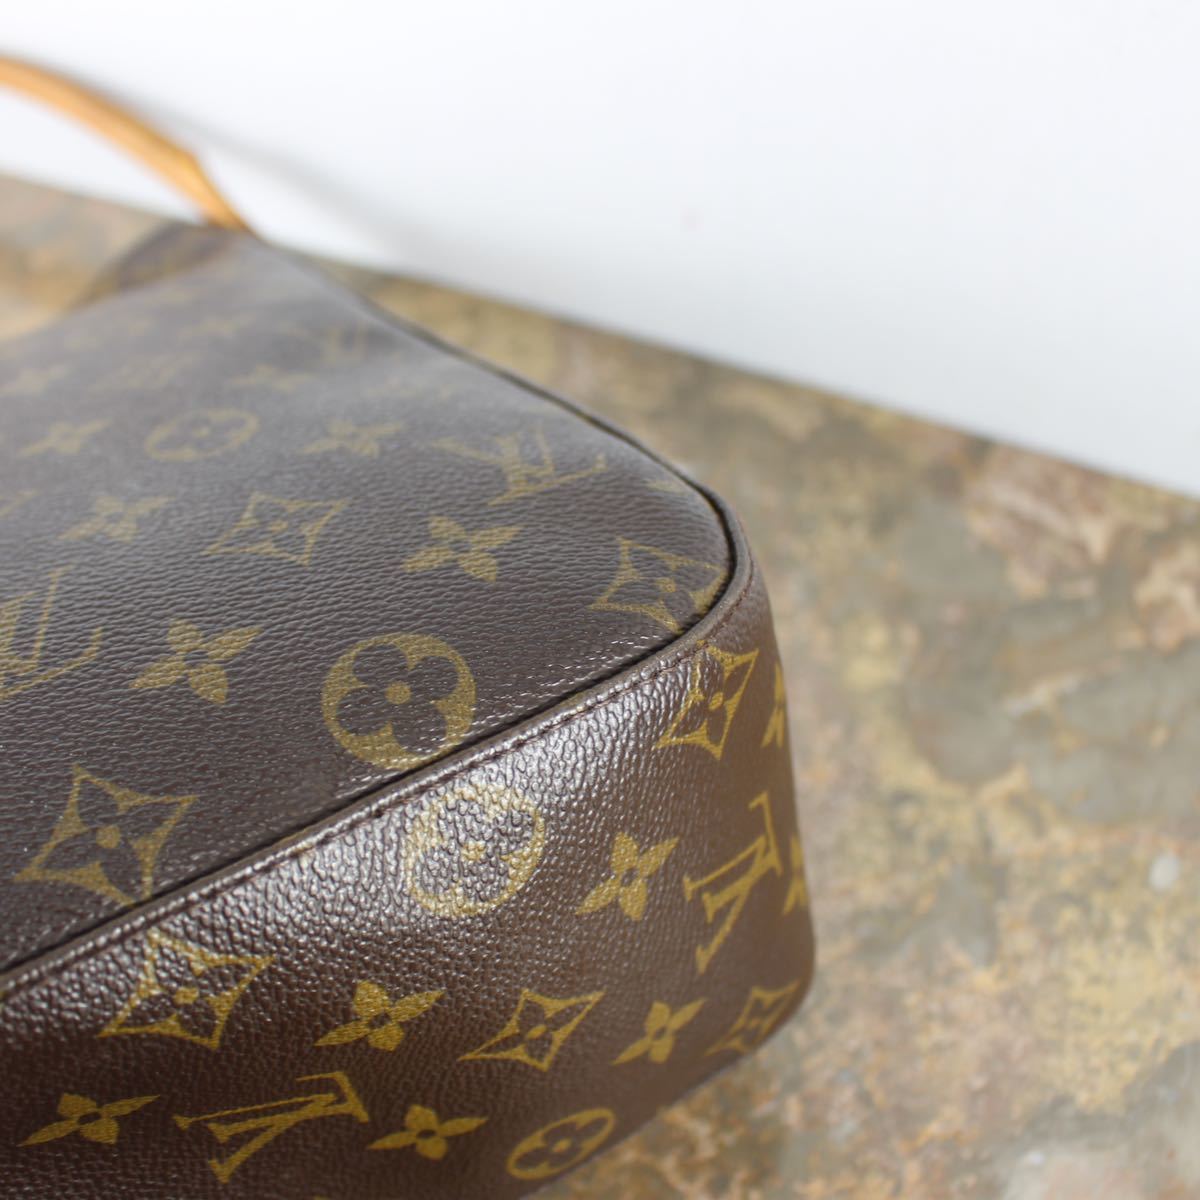 LOUIS VUITTON M51145 MI1929 MONOGRAM PATTERNED BAG TOTE BAG MADE IN  FRANCE/ルイヴィトンルーピングモノグラムトートバッグ